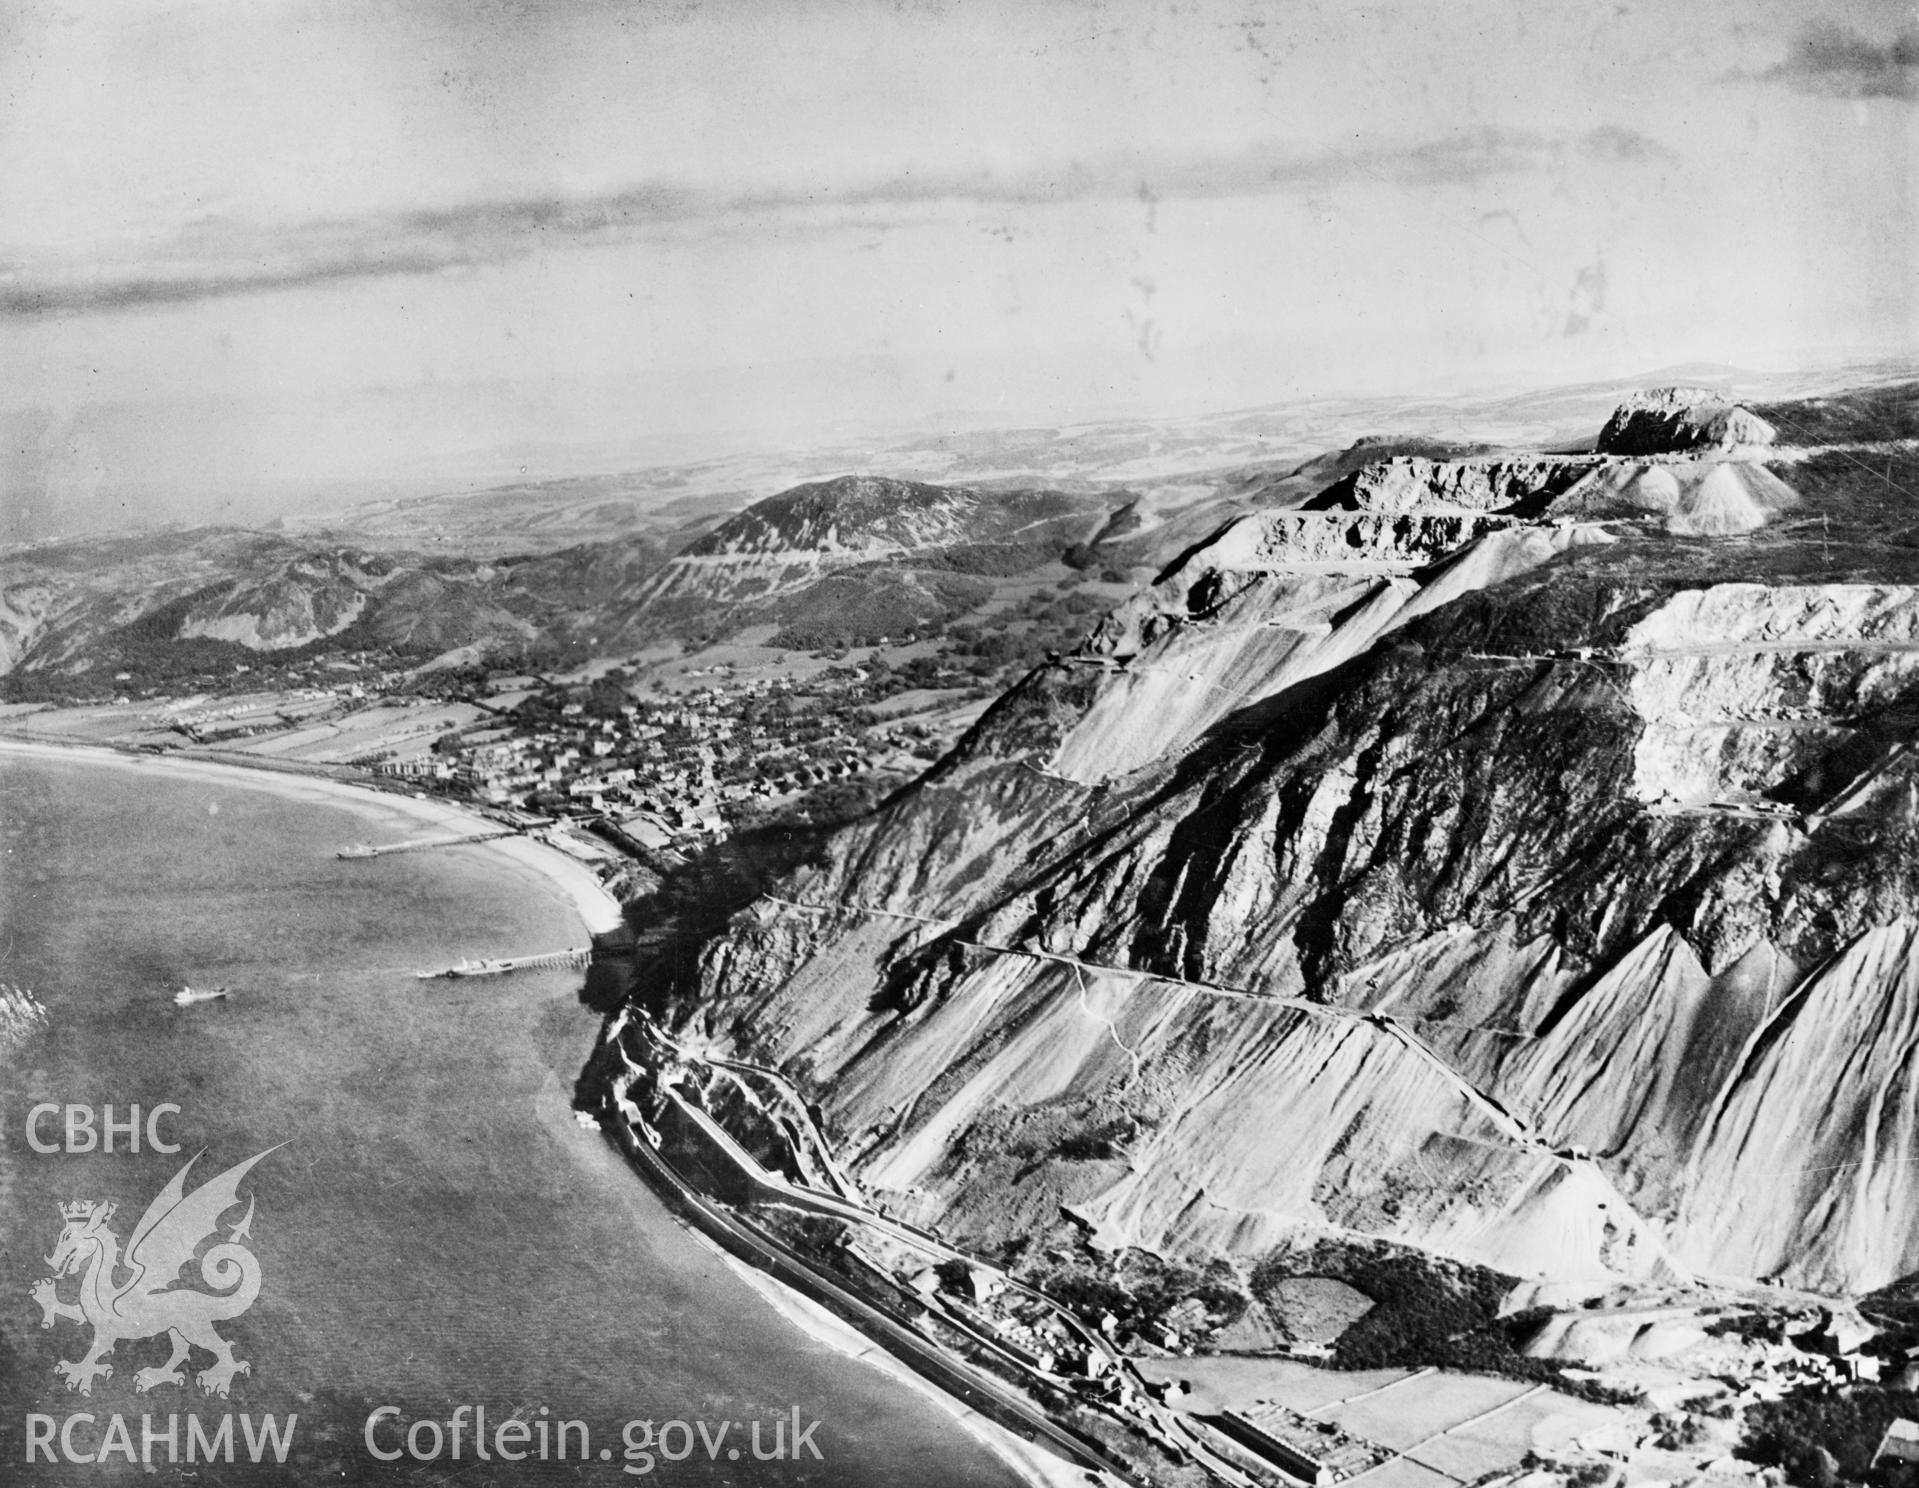 View of the newly completed Pen-y-clip road tunnels at Penmaenmawr showing Llanfairfechan. Oblique aerial photograph, 5?x4? BW glass plate.